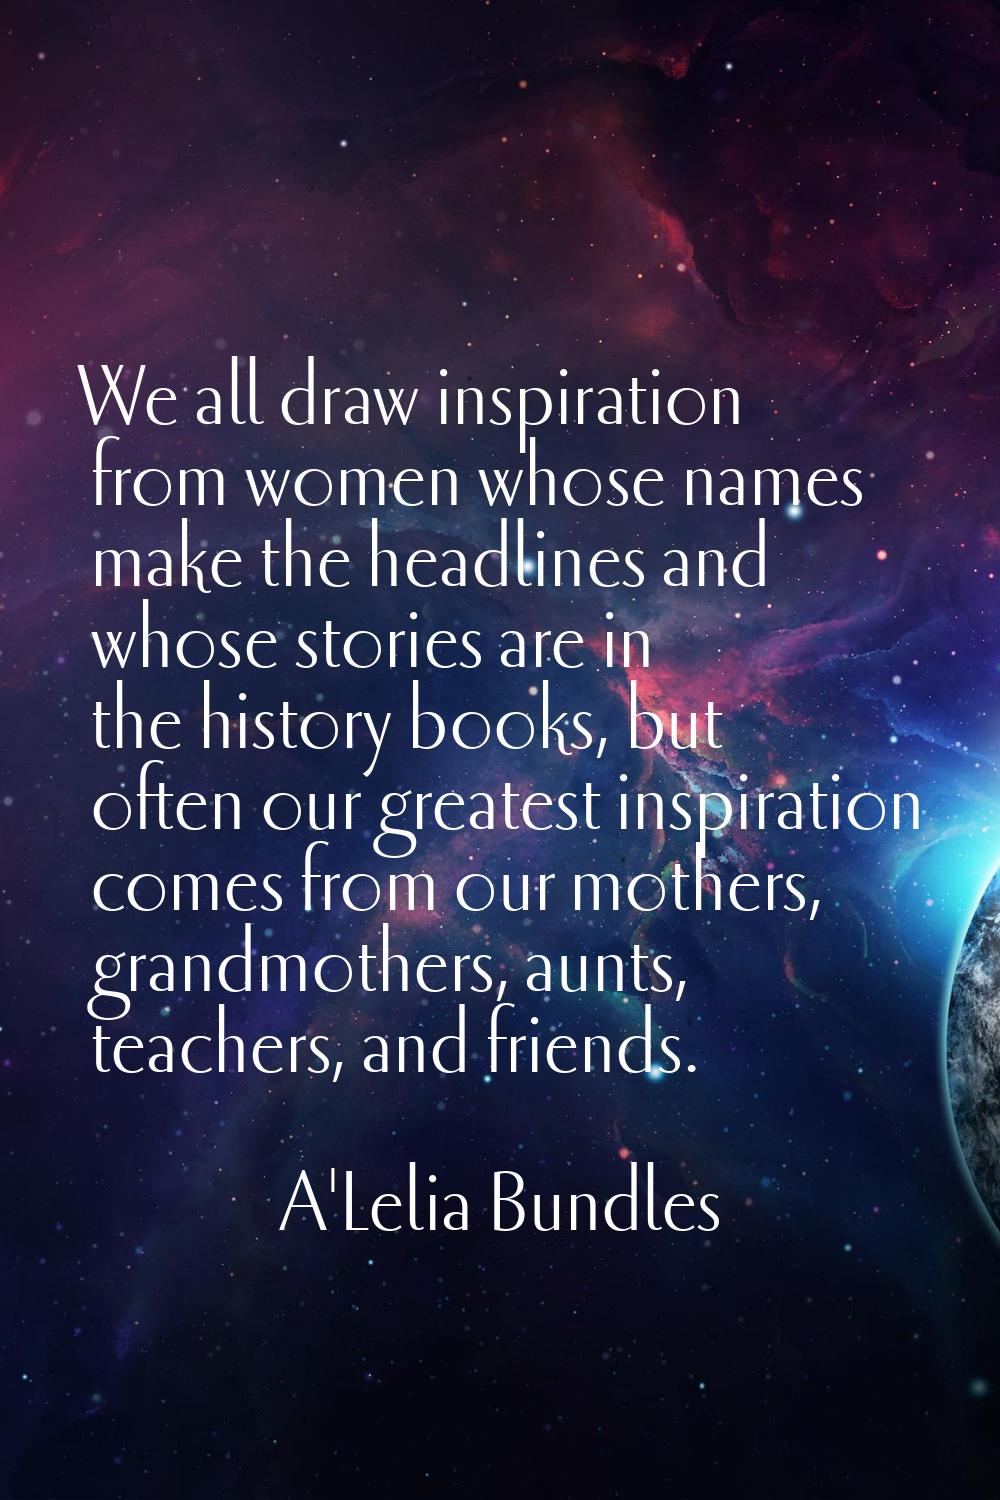 We all draw inspiration from women whose names make the headlines and whose stories are in the hist